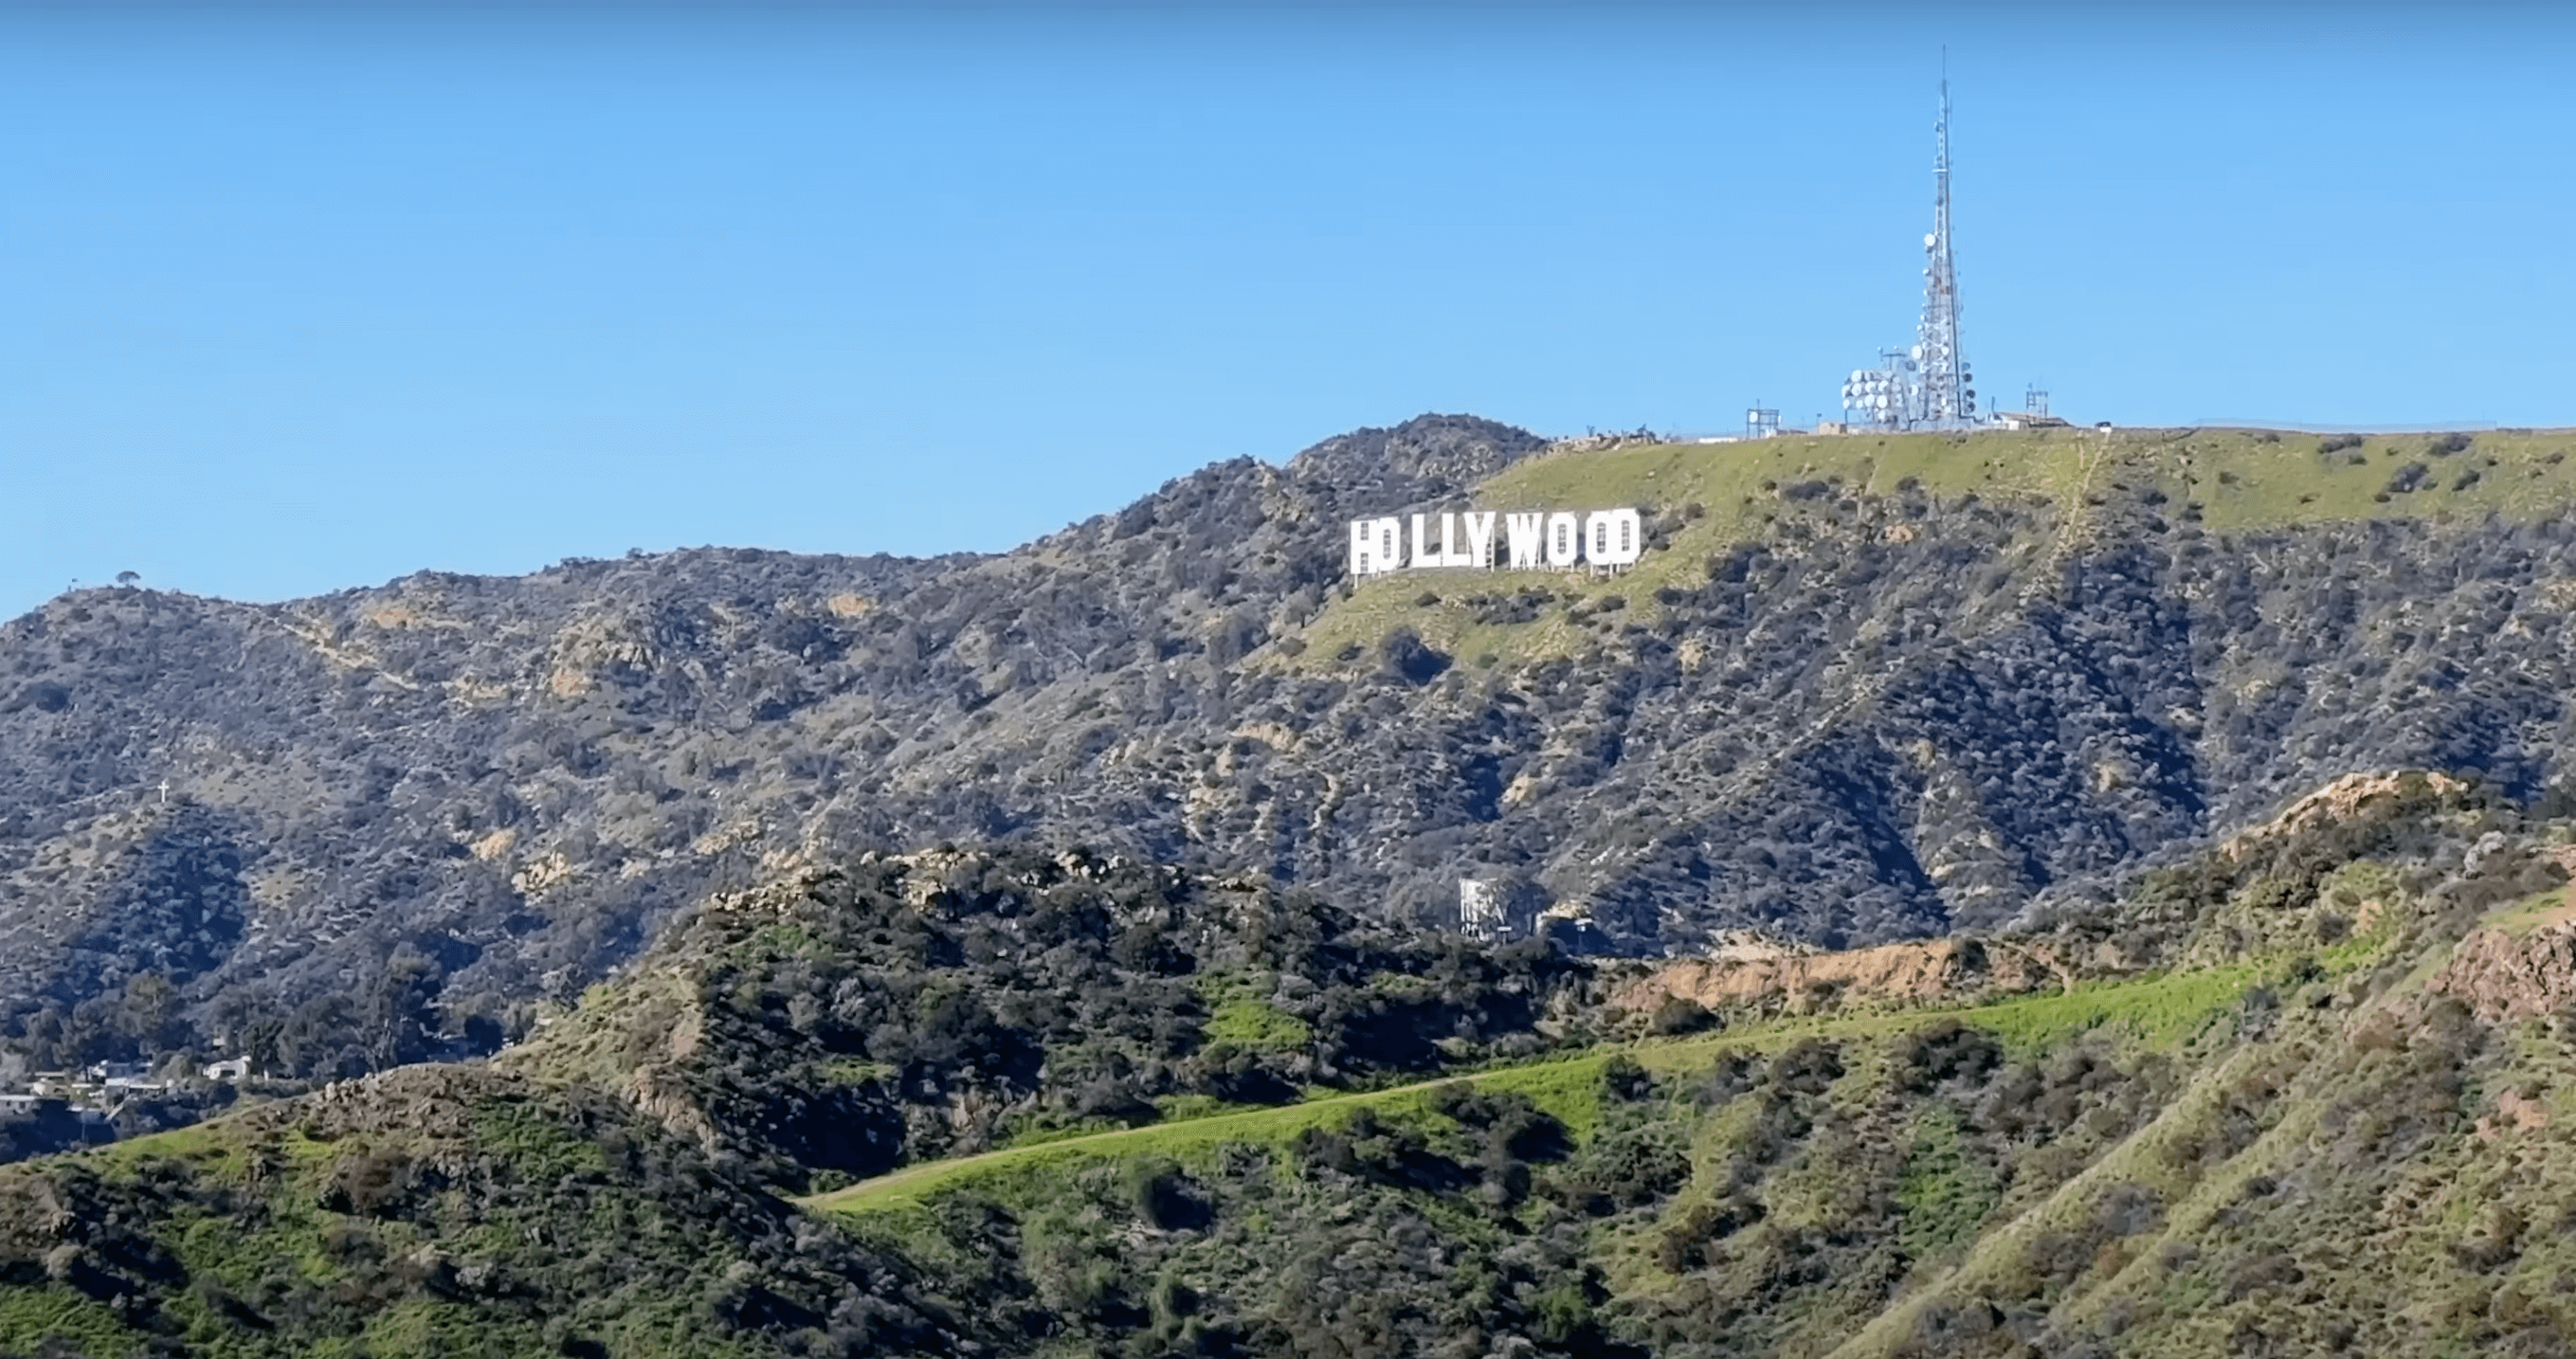 Los Angeles, Hollywood sign